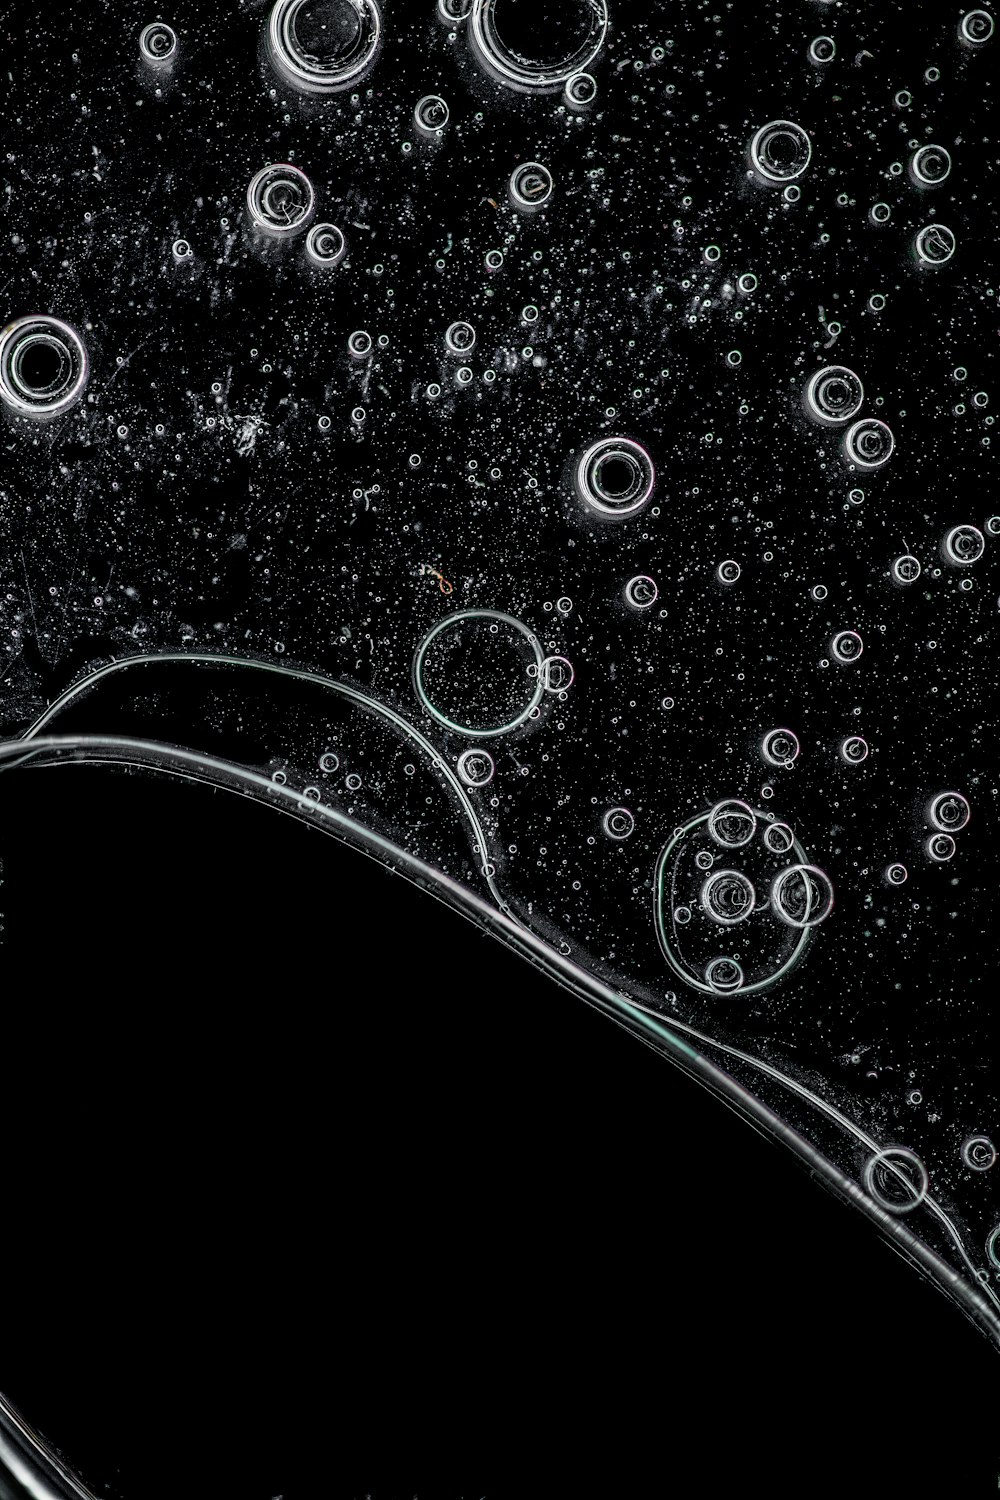 1000+ Bubbles Background Pictures | Download Free Images on Unsplash